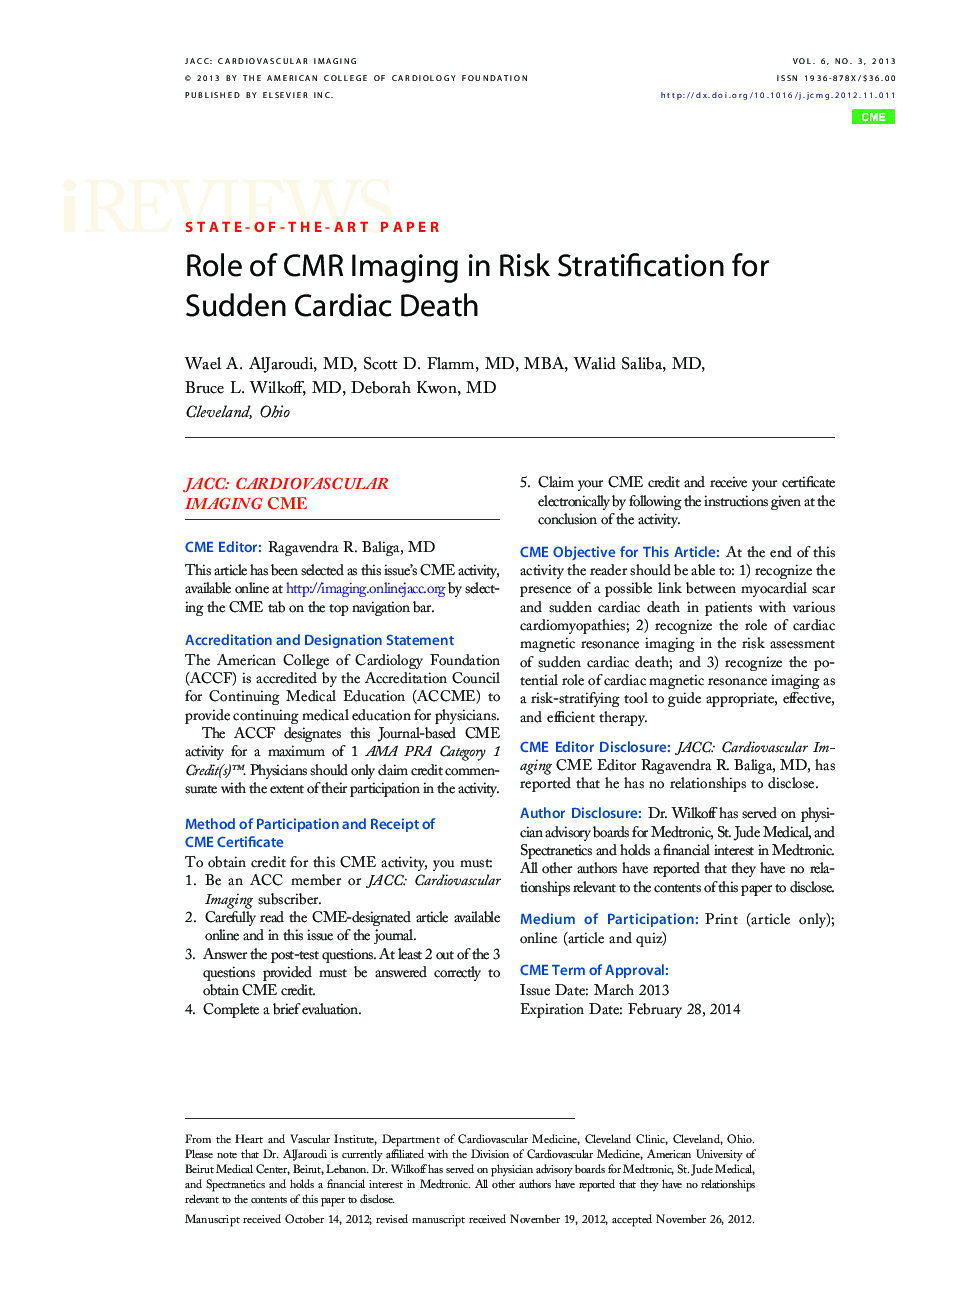 Role of CMR Imaging in Risk Stratification for Sudden Cardiac Death 